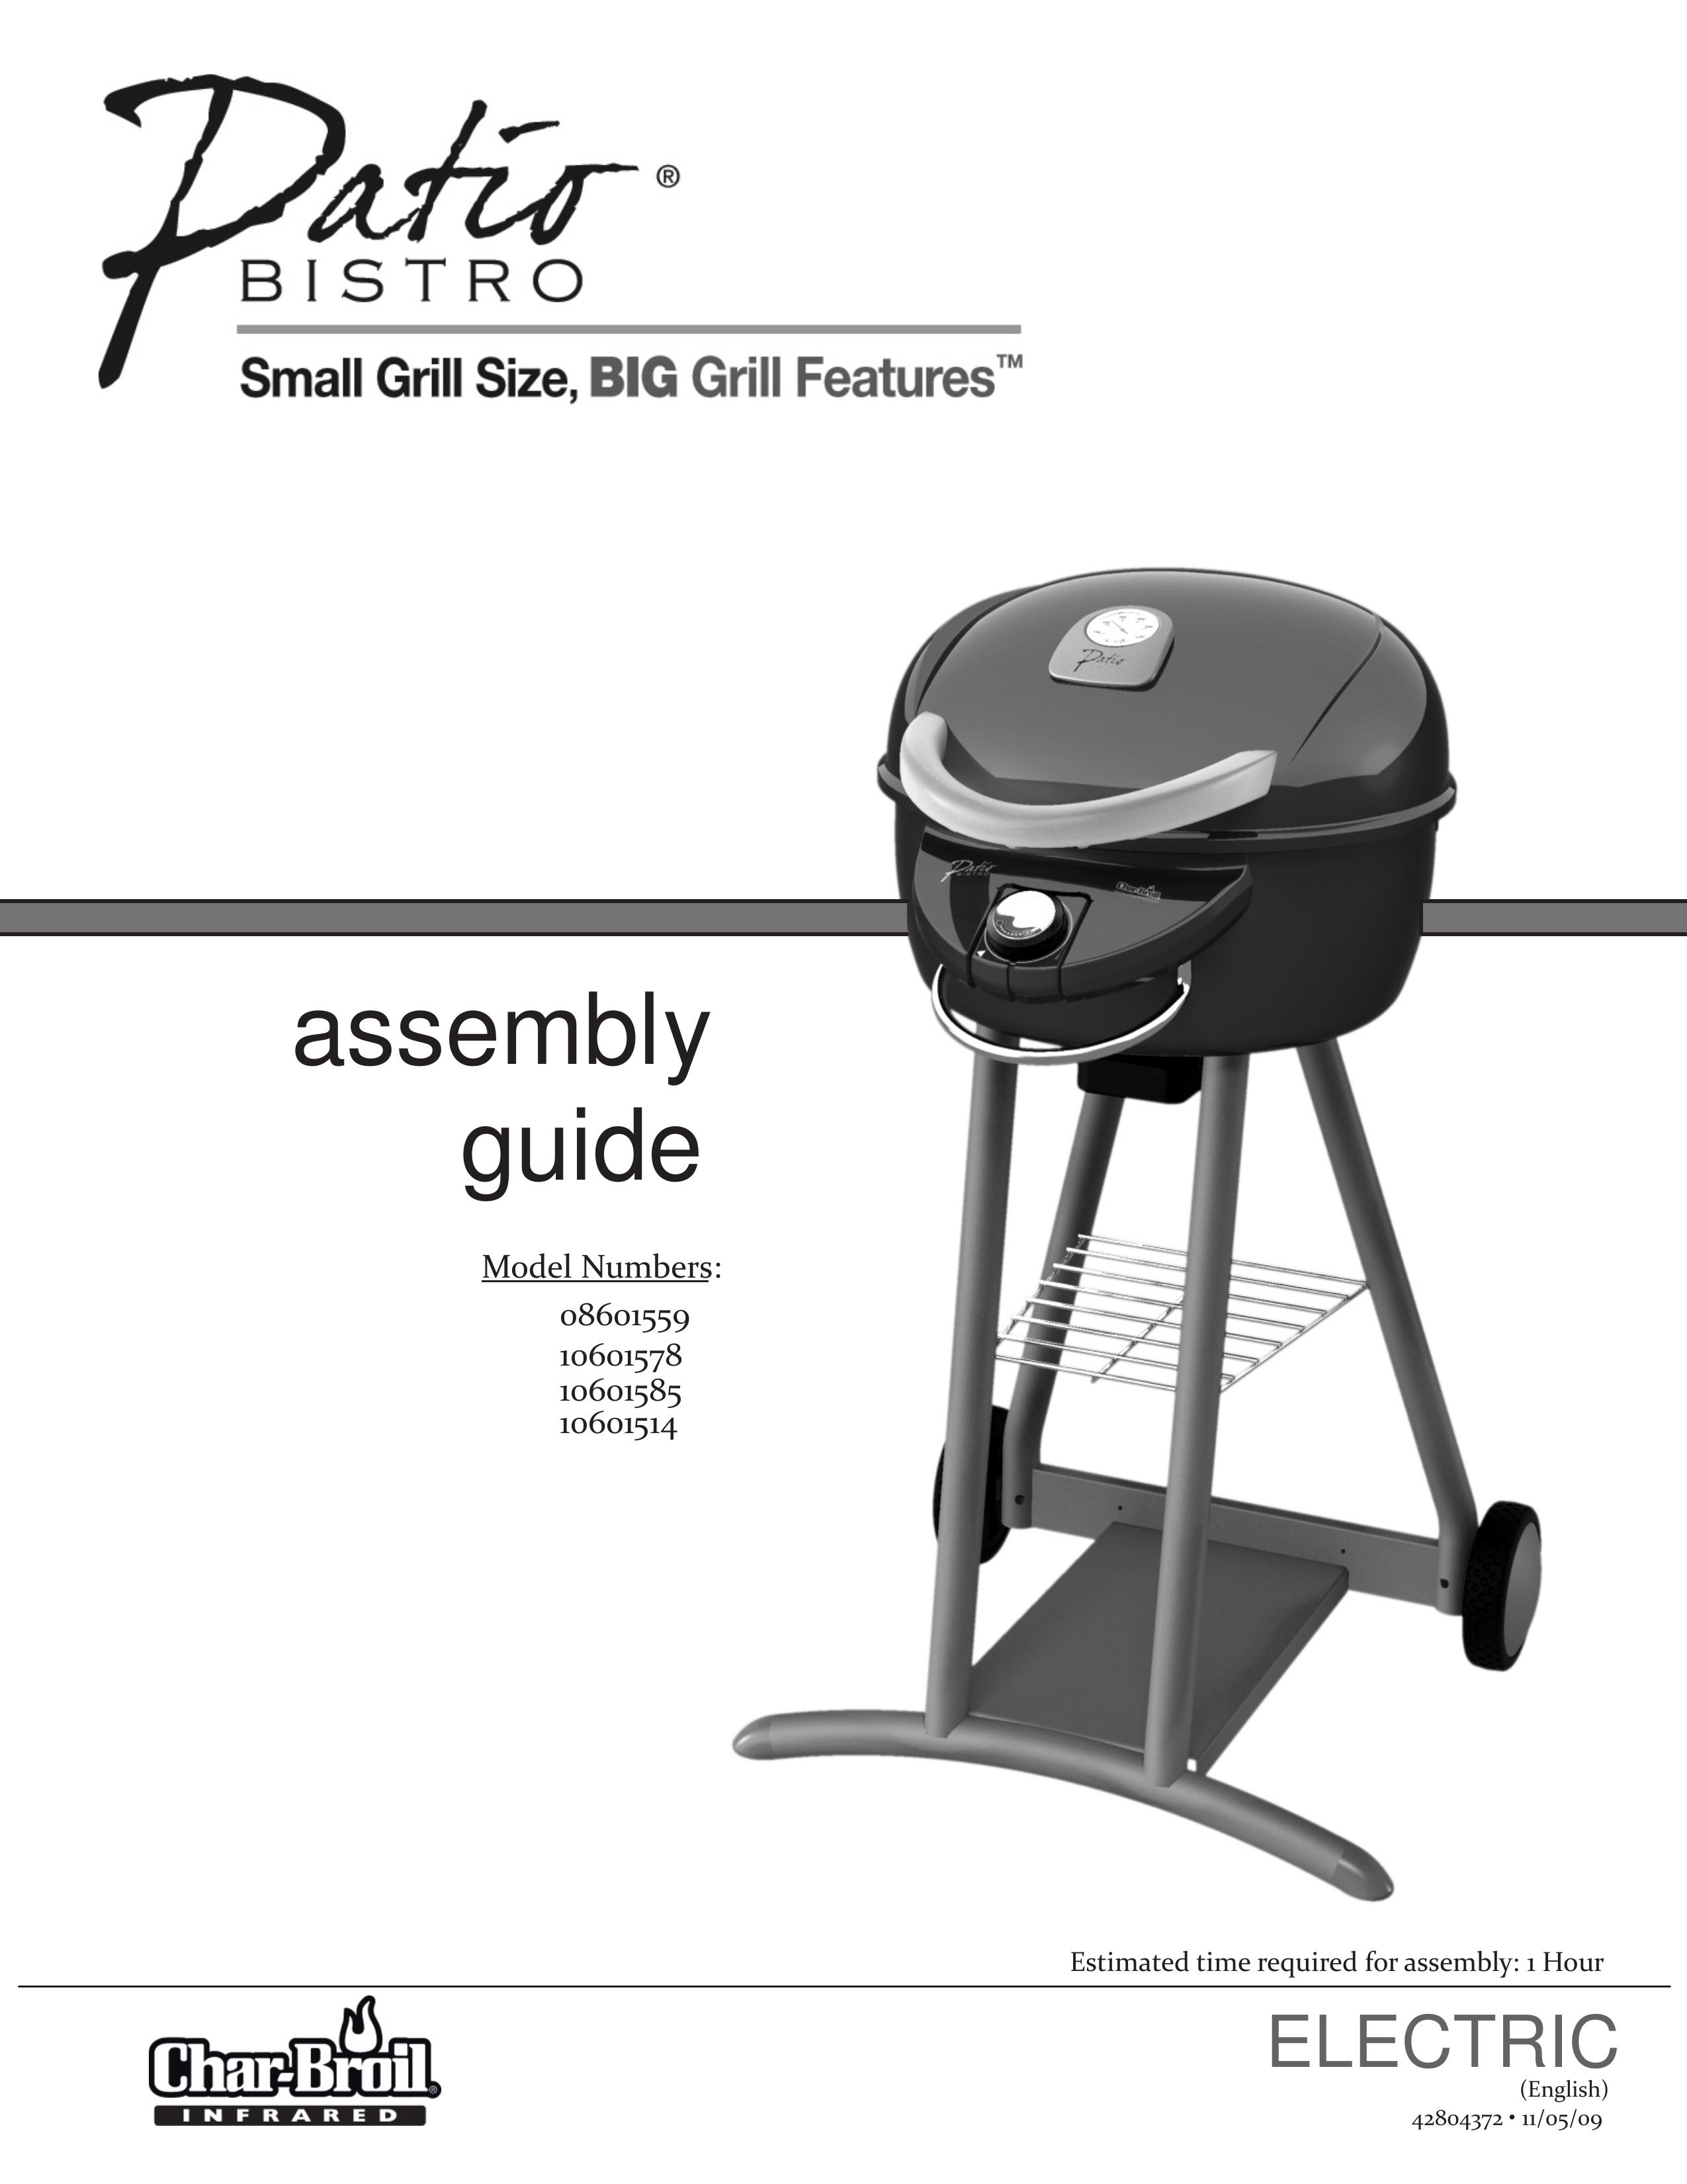 Char-Broil 10601514 Electric Grill User Manual (Page 1)